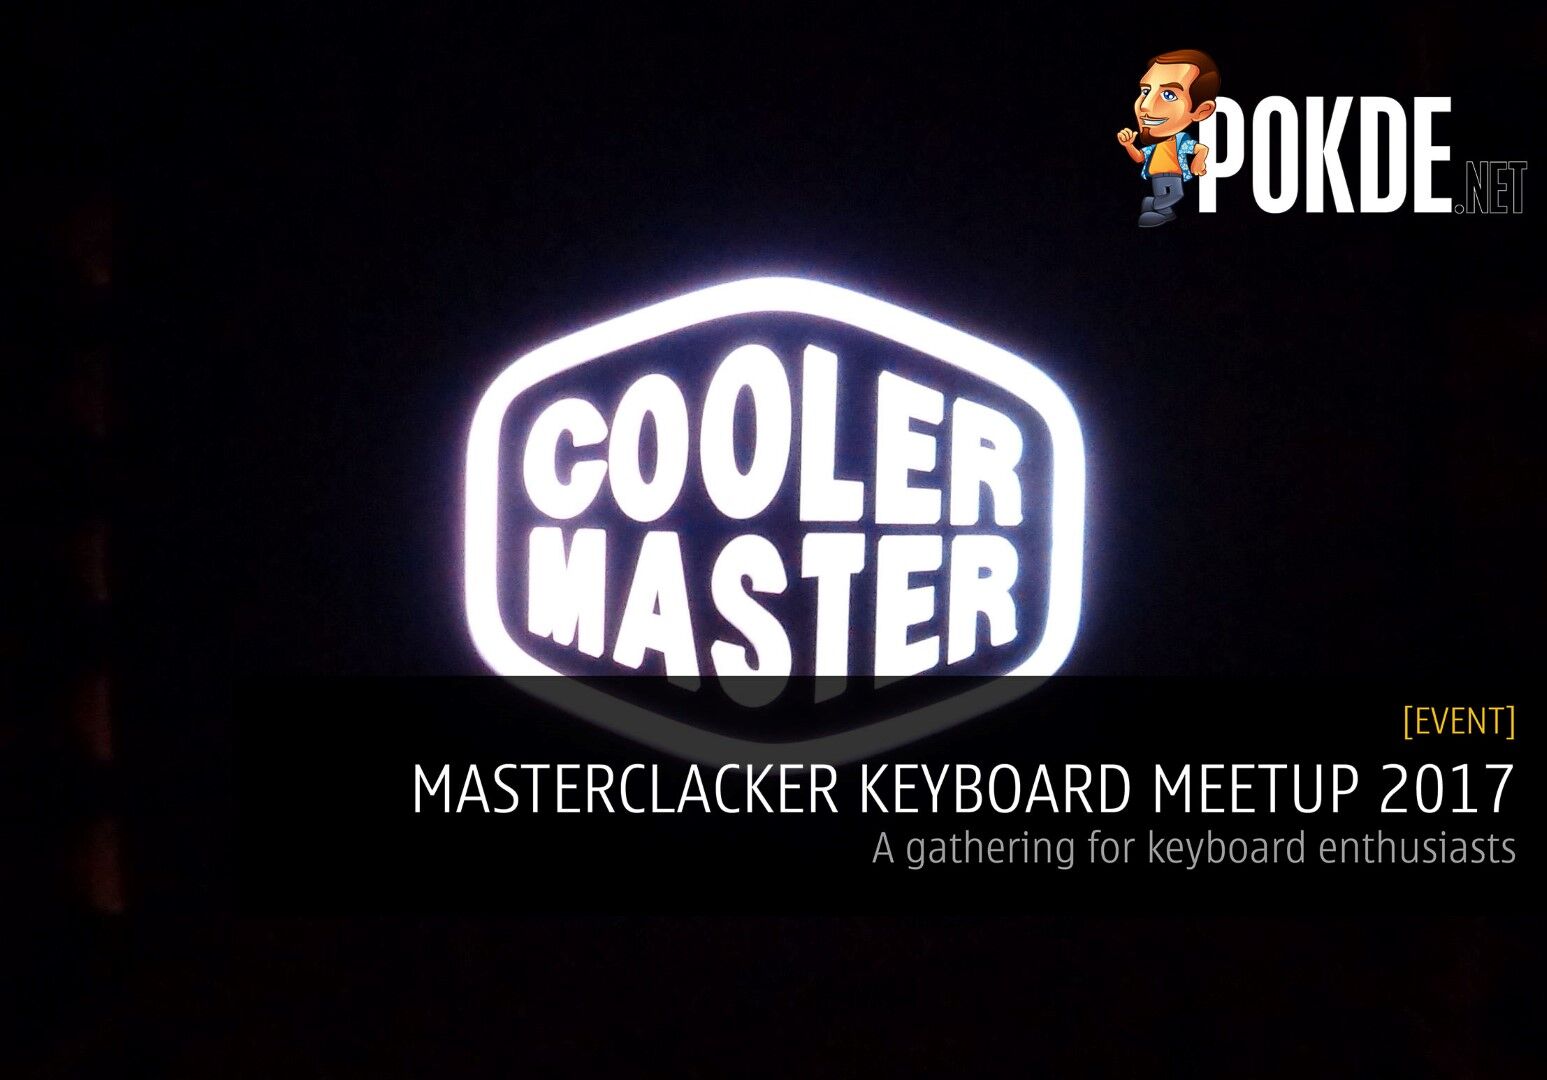 Come join the MasterClacker Keyboard Meetup 2017 29